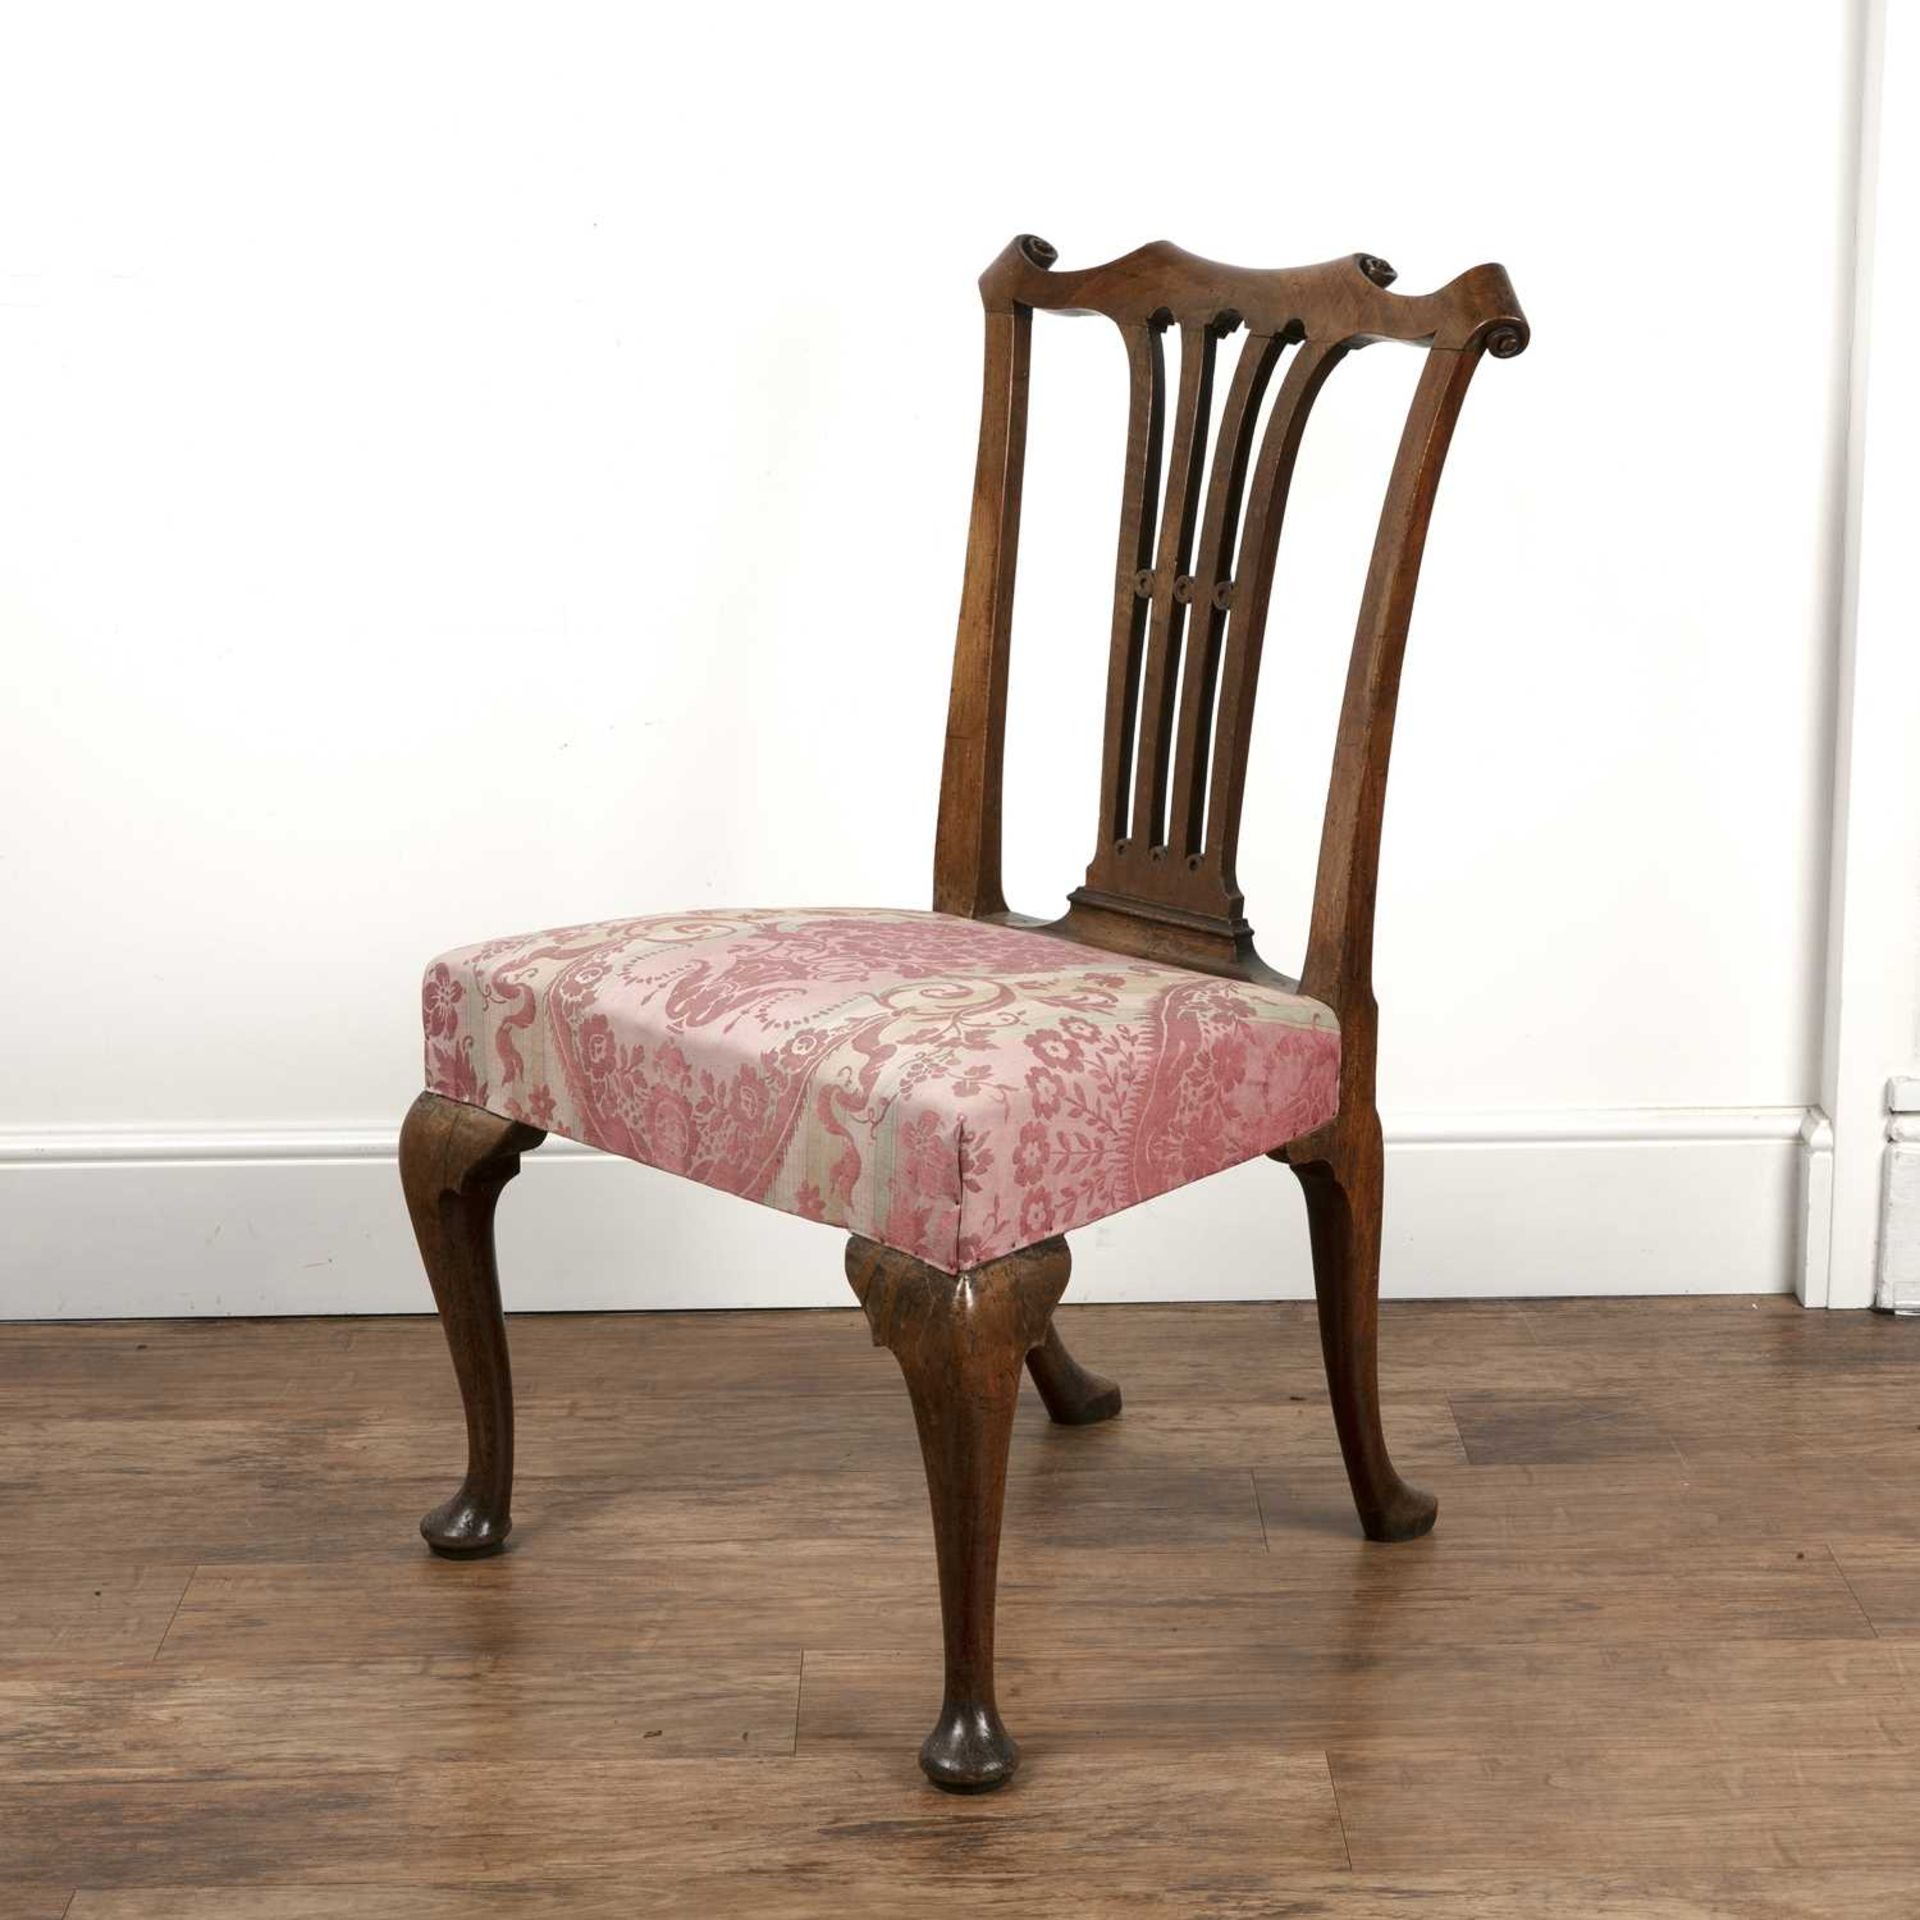 Mahogany side chair 18th Century, with a splat back and reupholstered seat, 60cm wide x 97cm high - Bild 3 aus 4